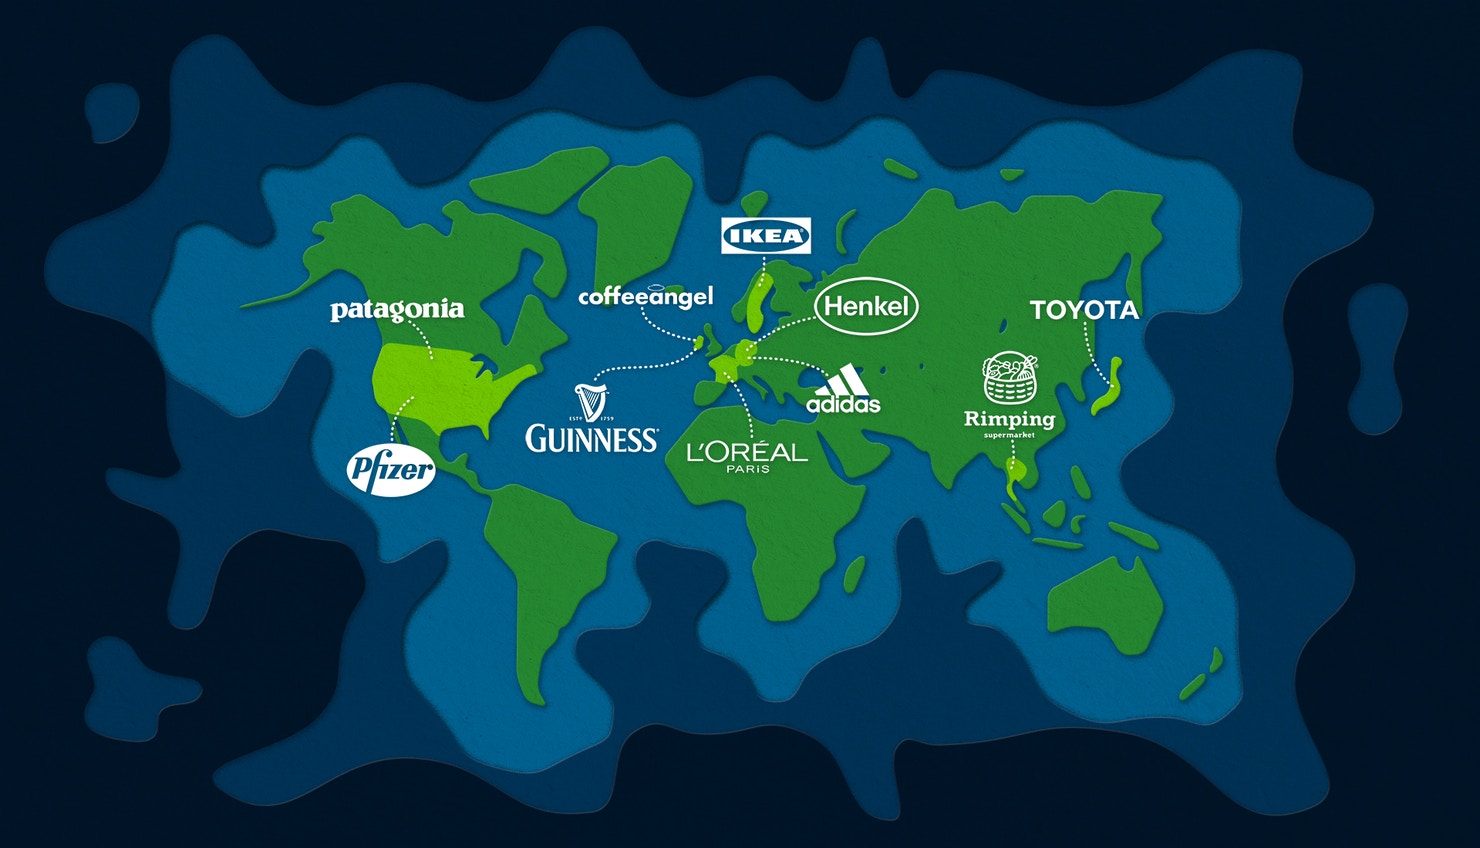 Global green initiatives – ten companies making a difference